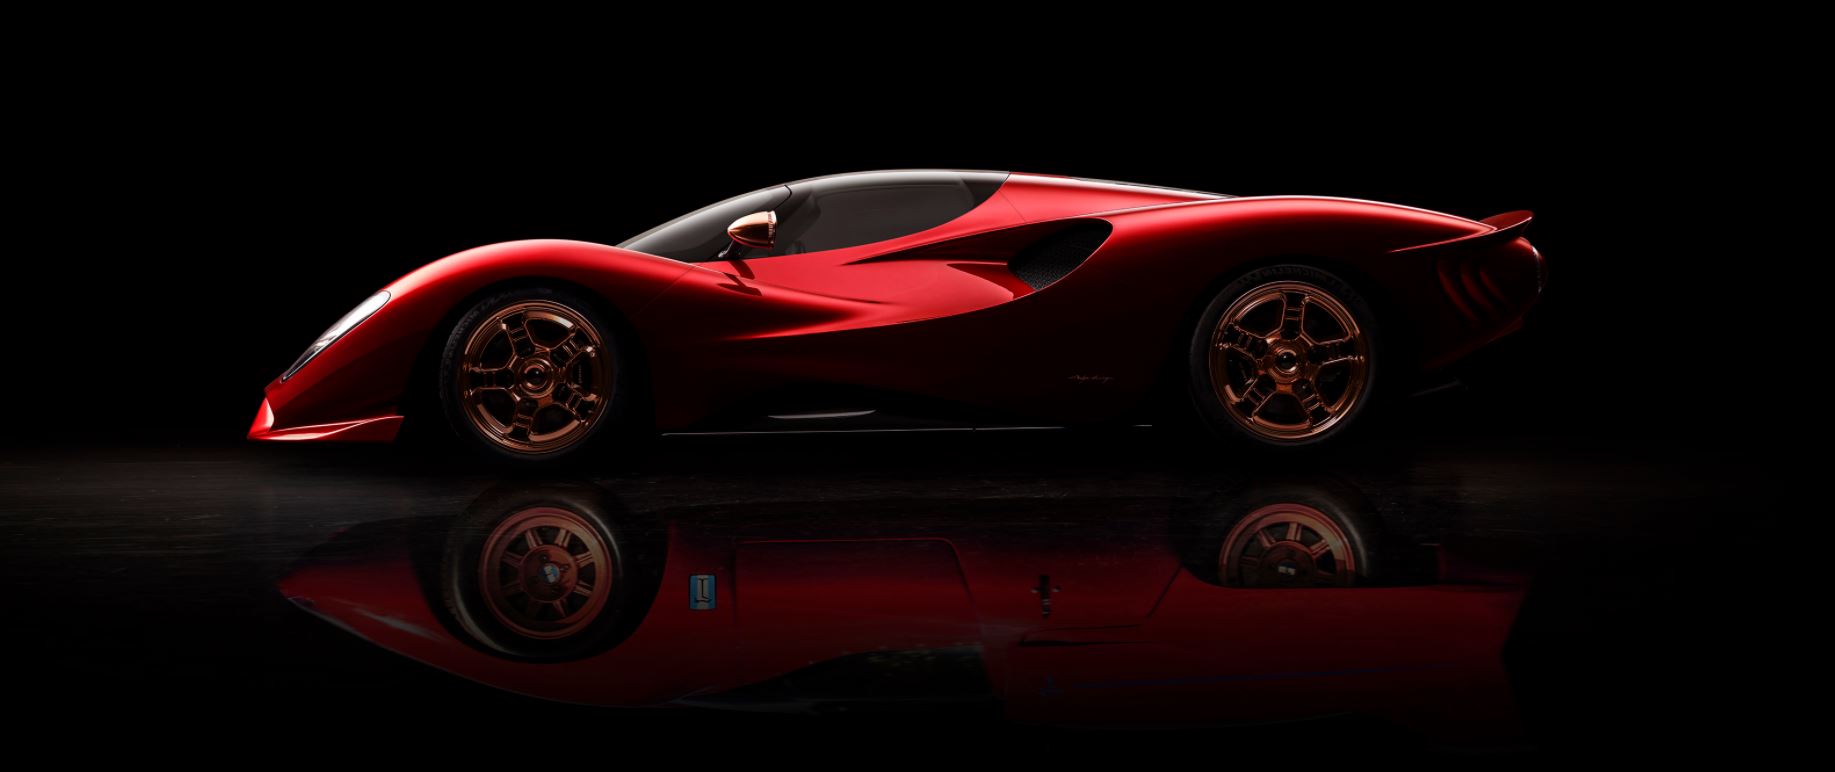 A red, low-slung, curvy sports car sits against a black background. The De Tomaso P72